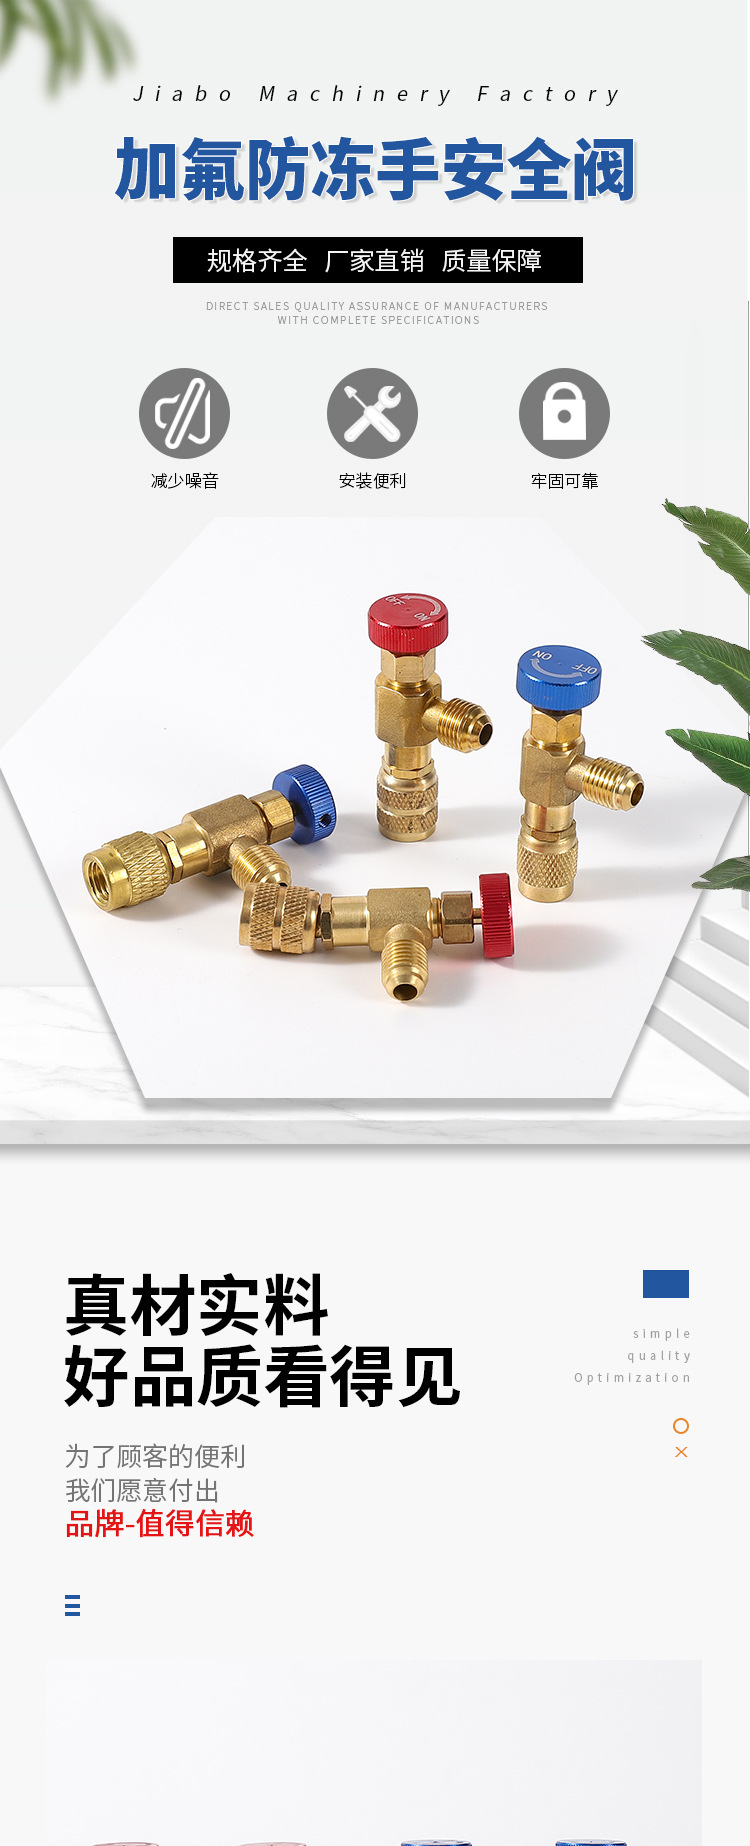 1 4 To 5 16 Air Conditioner Fluoride Flow Switch 22410 Antifreeze Hand Safety Valve Has Complete Models And Strong Versatility.